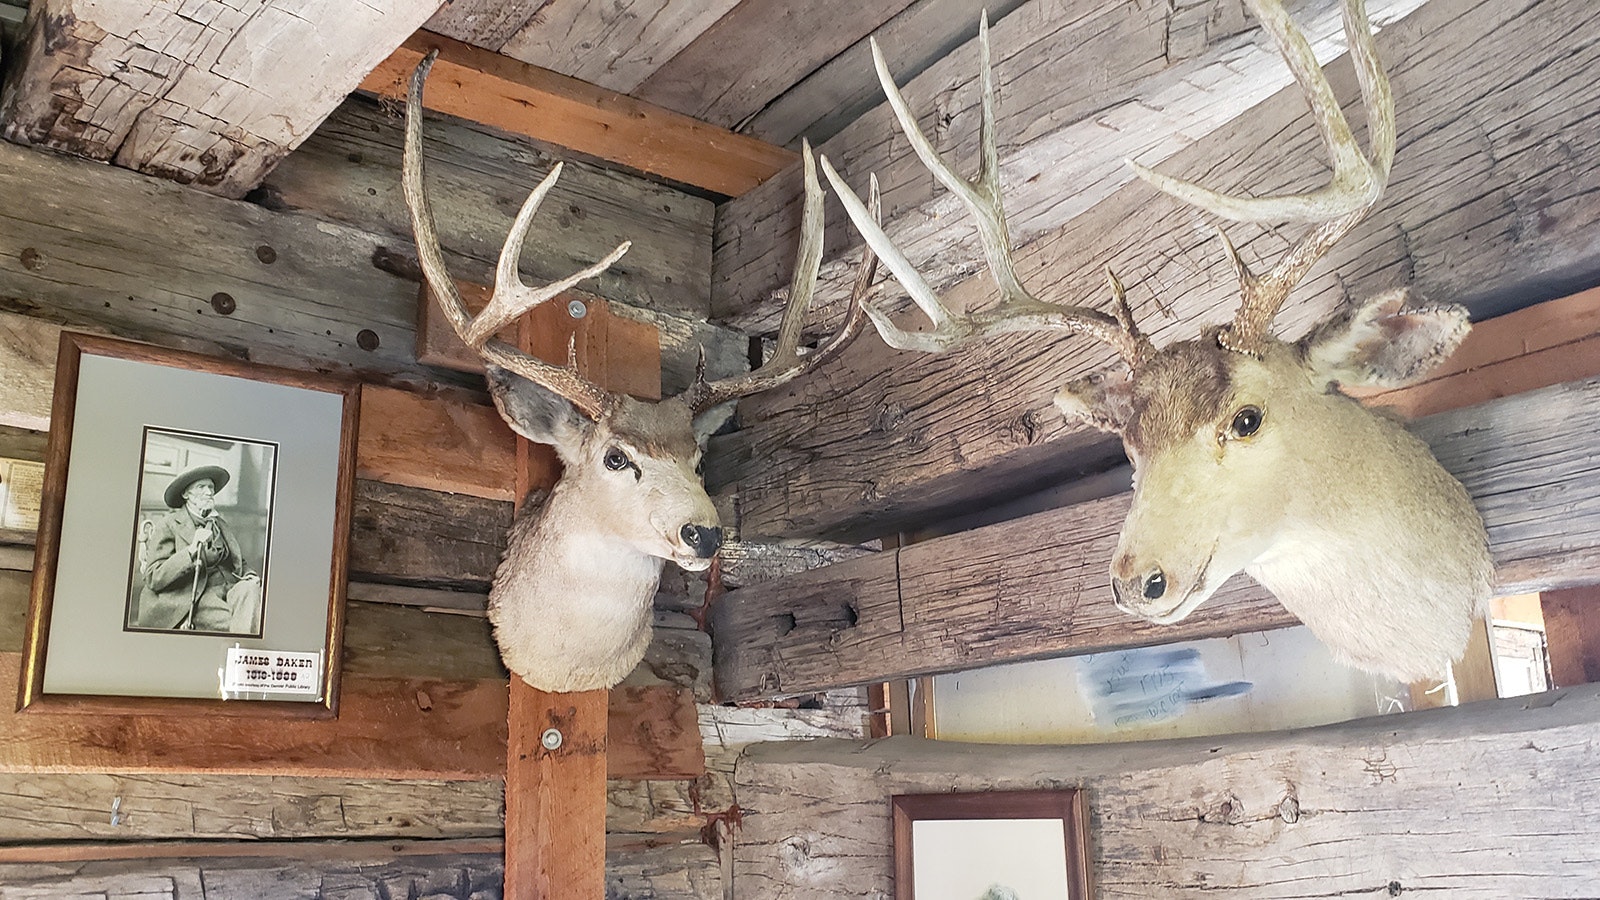 Hunting trophies adorn the walls of Jim Baker's cabin fortress in Savery, Wyoming.